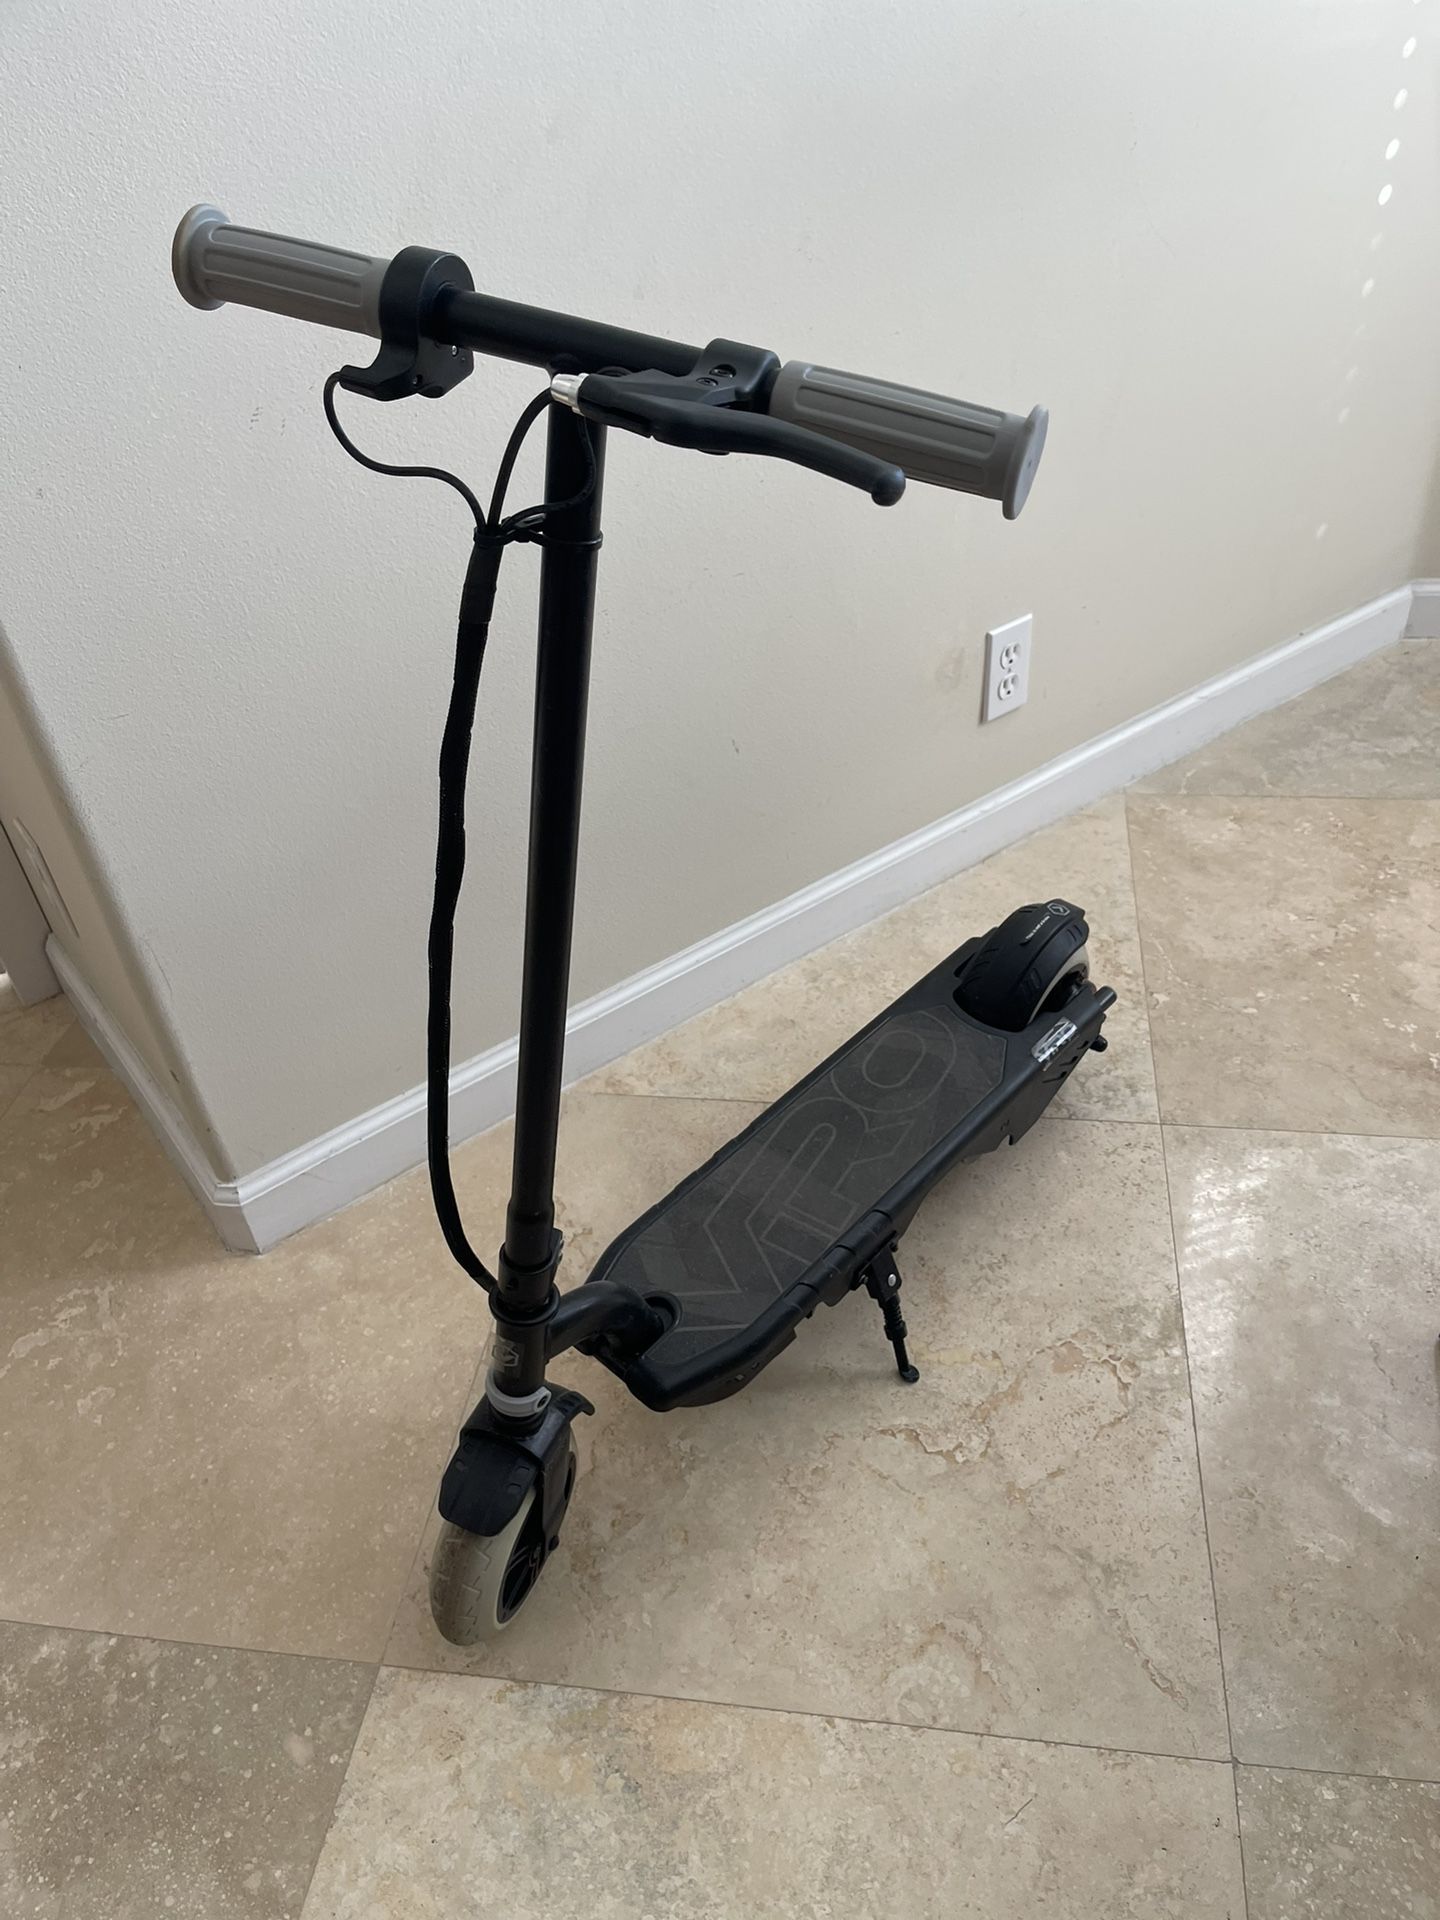 Razor Power Core E90 Electric Scooter - NEEDS NEW BATTERY AND CHARGER Or For PARTS 